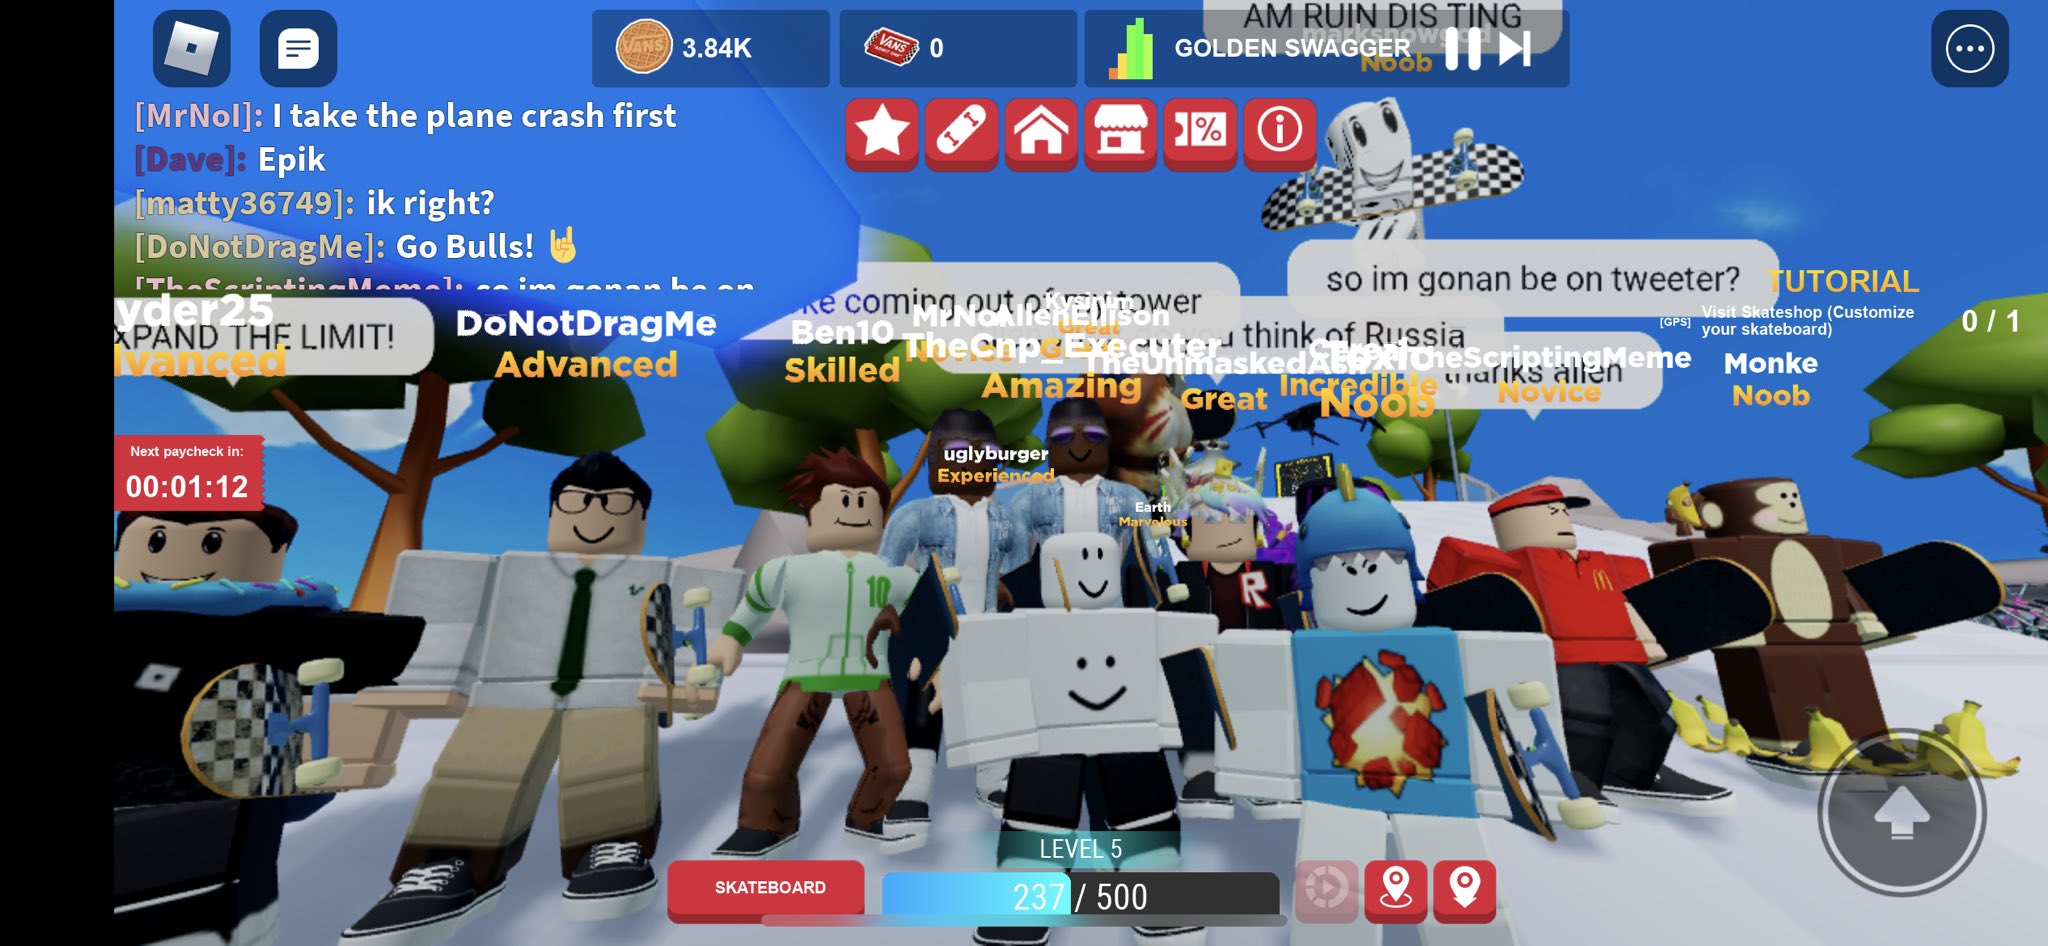 If ROBLOX Got Guests Back 